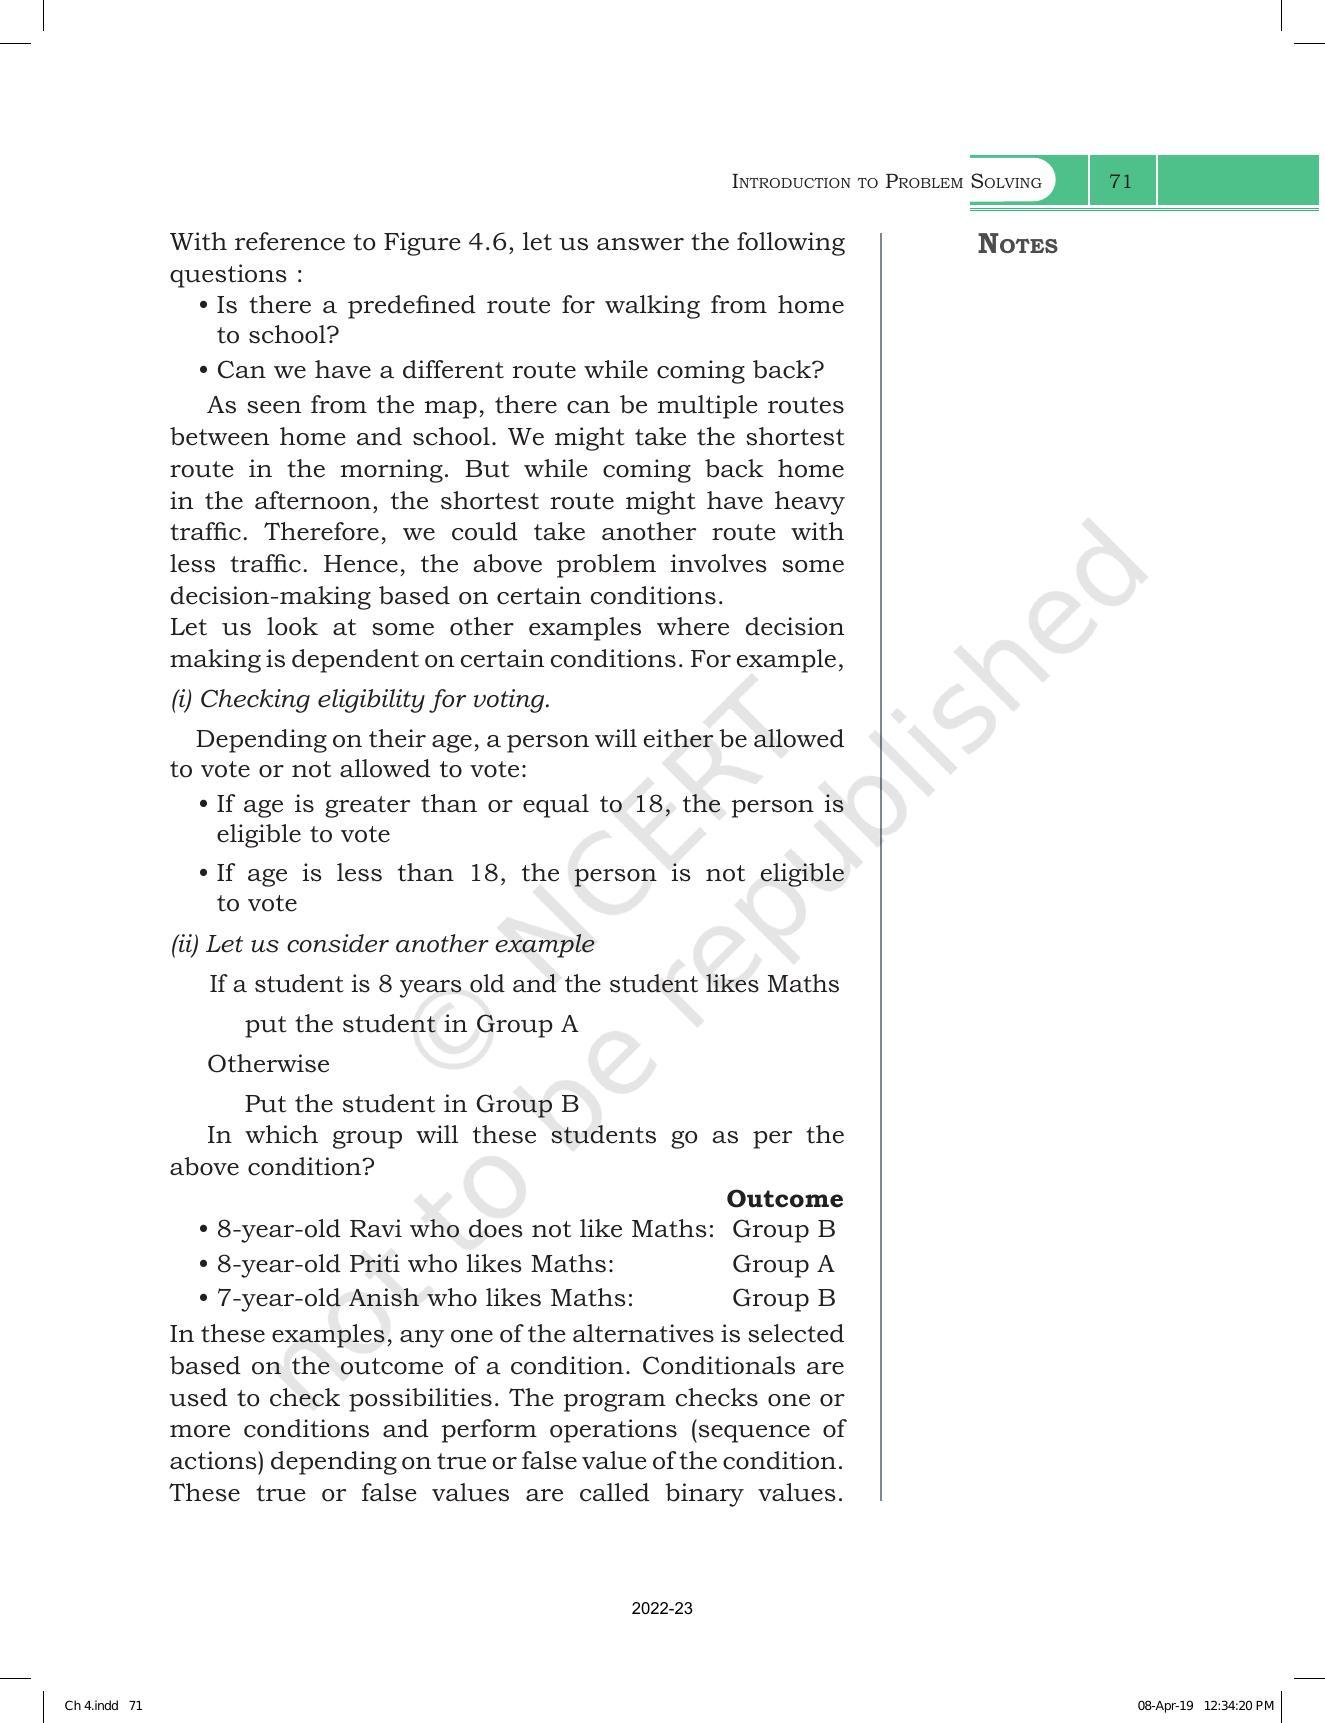 NCERT Book for Class 11 Computer Science Chapter 4 Introduction to Problem-Solving - Page 11